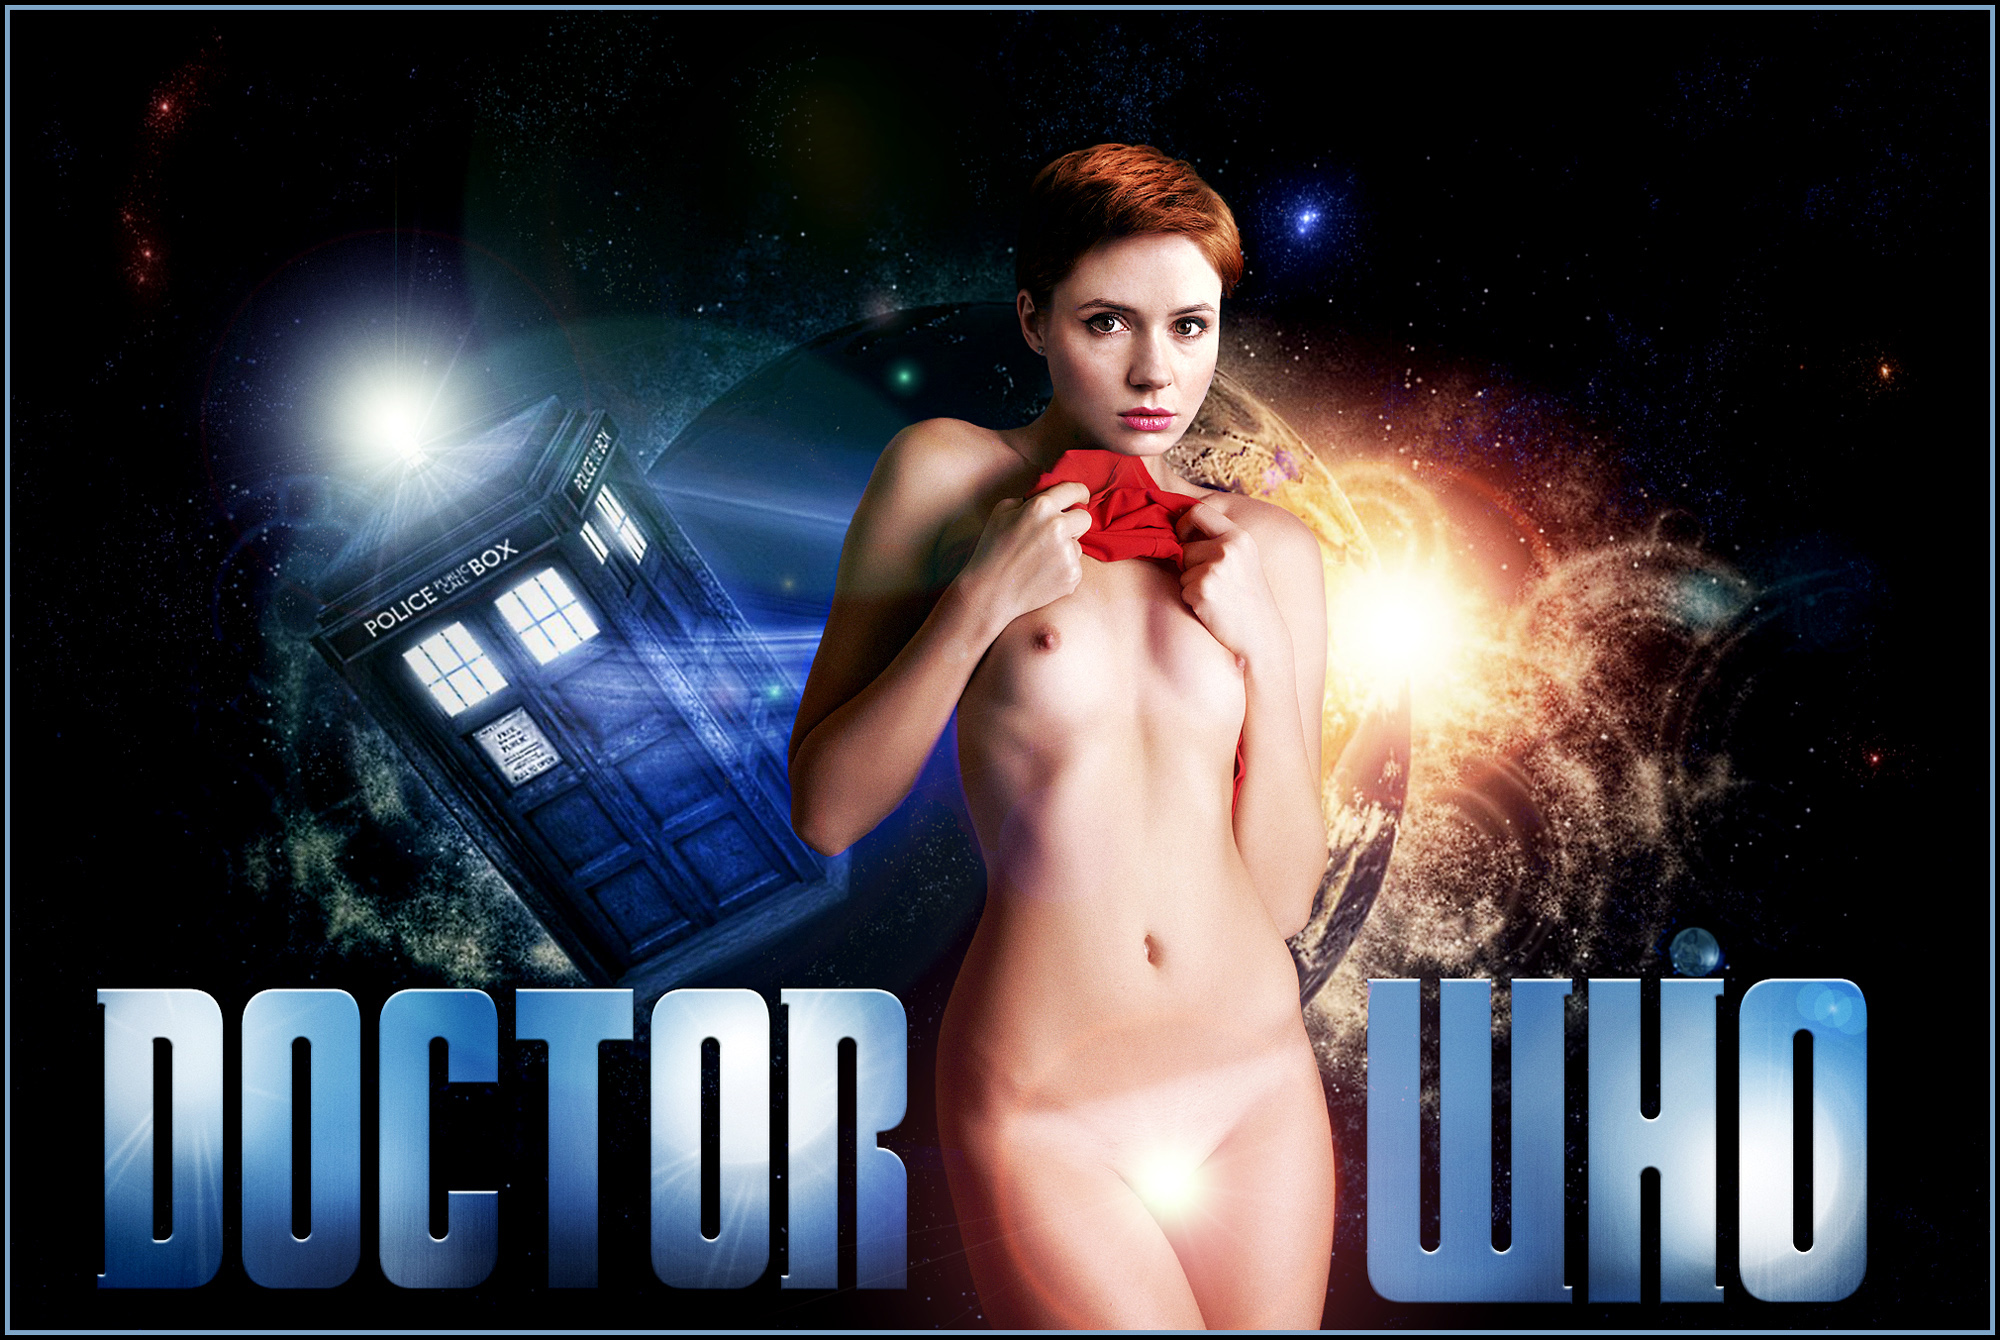 amy pond cosplay porn naked video pics